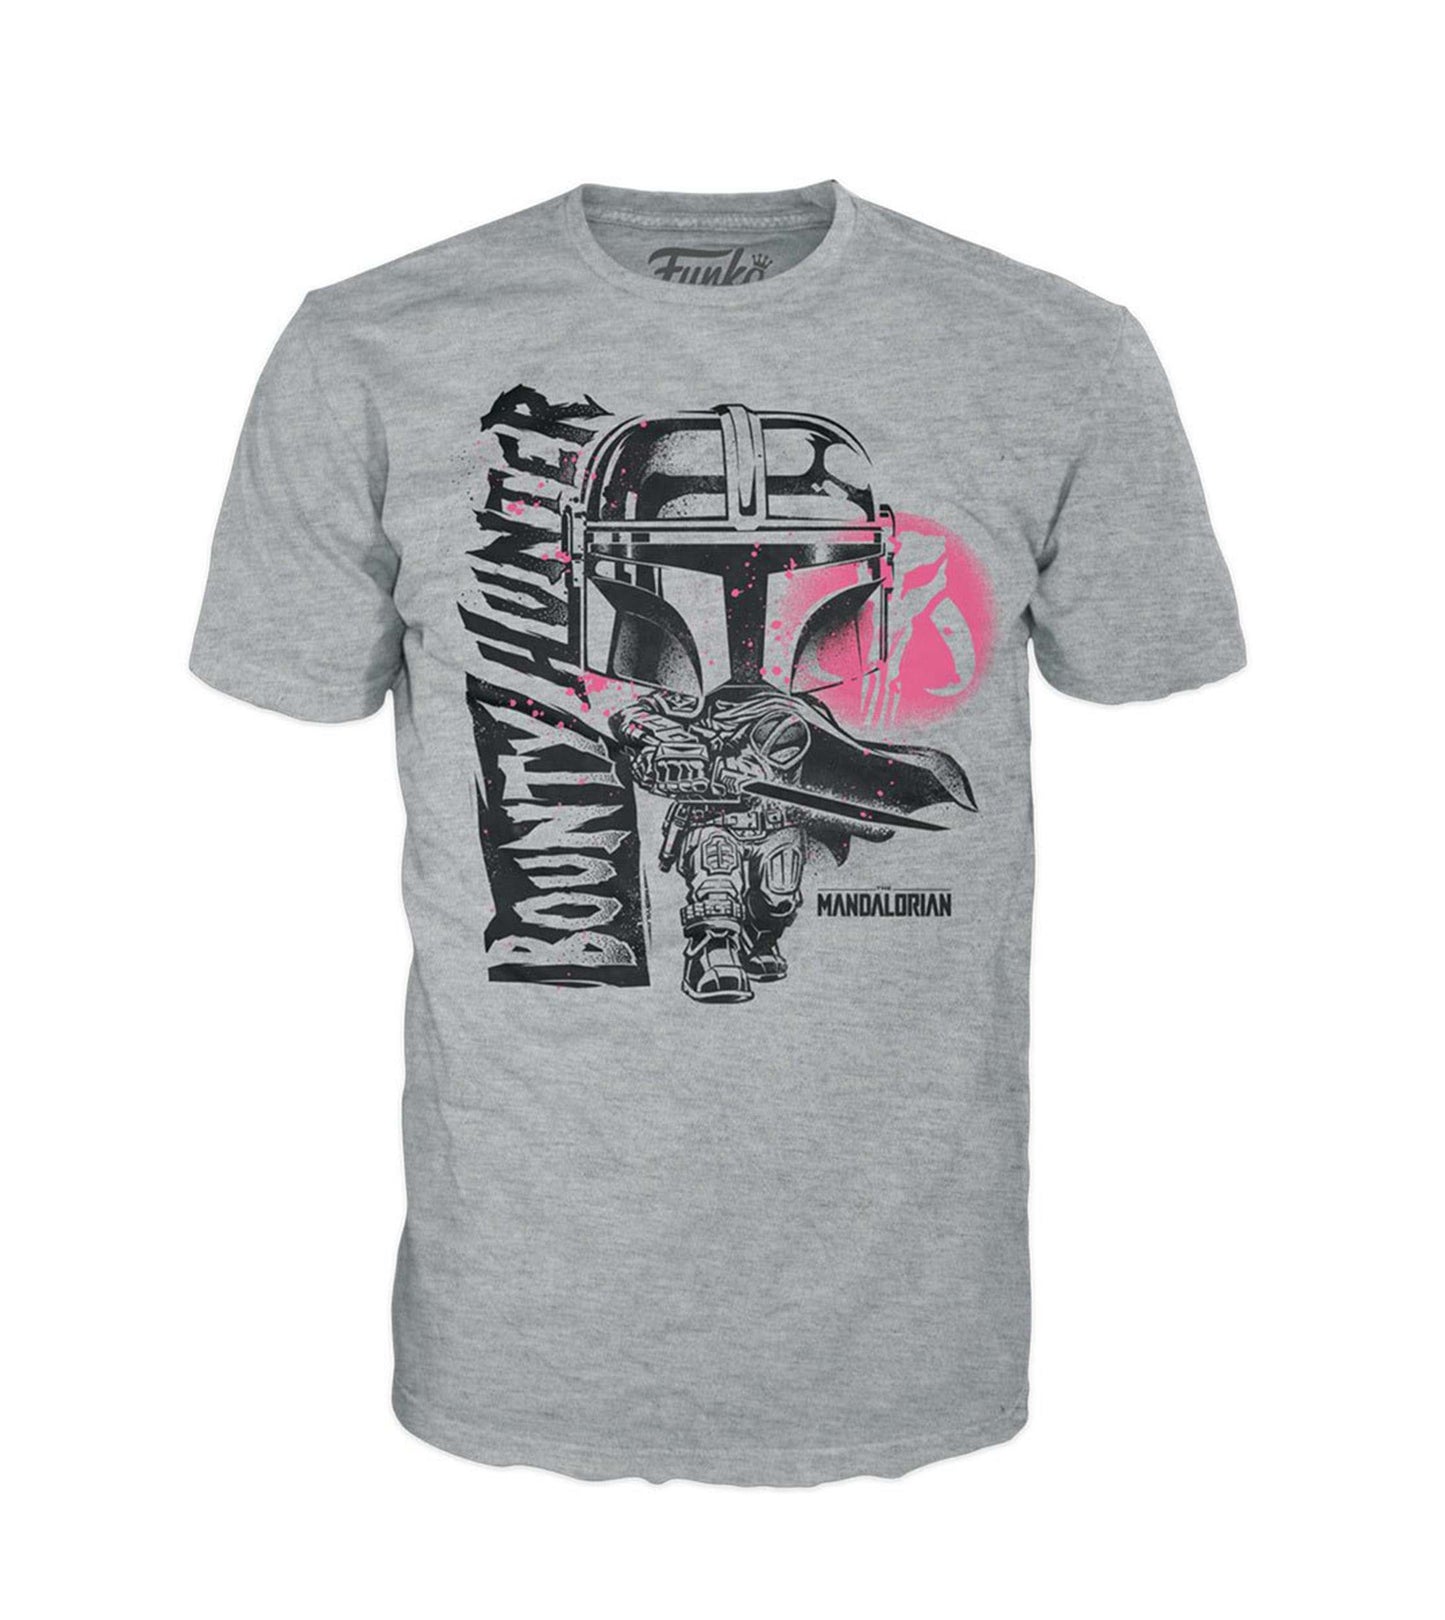 Star Wars Mandalorian - Funko Pop! The Mandalorian Tee featuring an image of a heather grey tee with a a black Chibi style image of Mando and the Words Bounty Hunter on it, pink mythosaur image on upper right sid